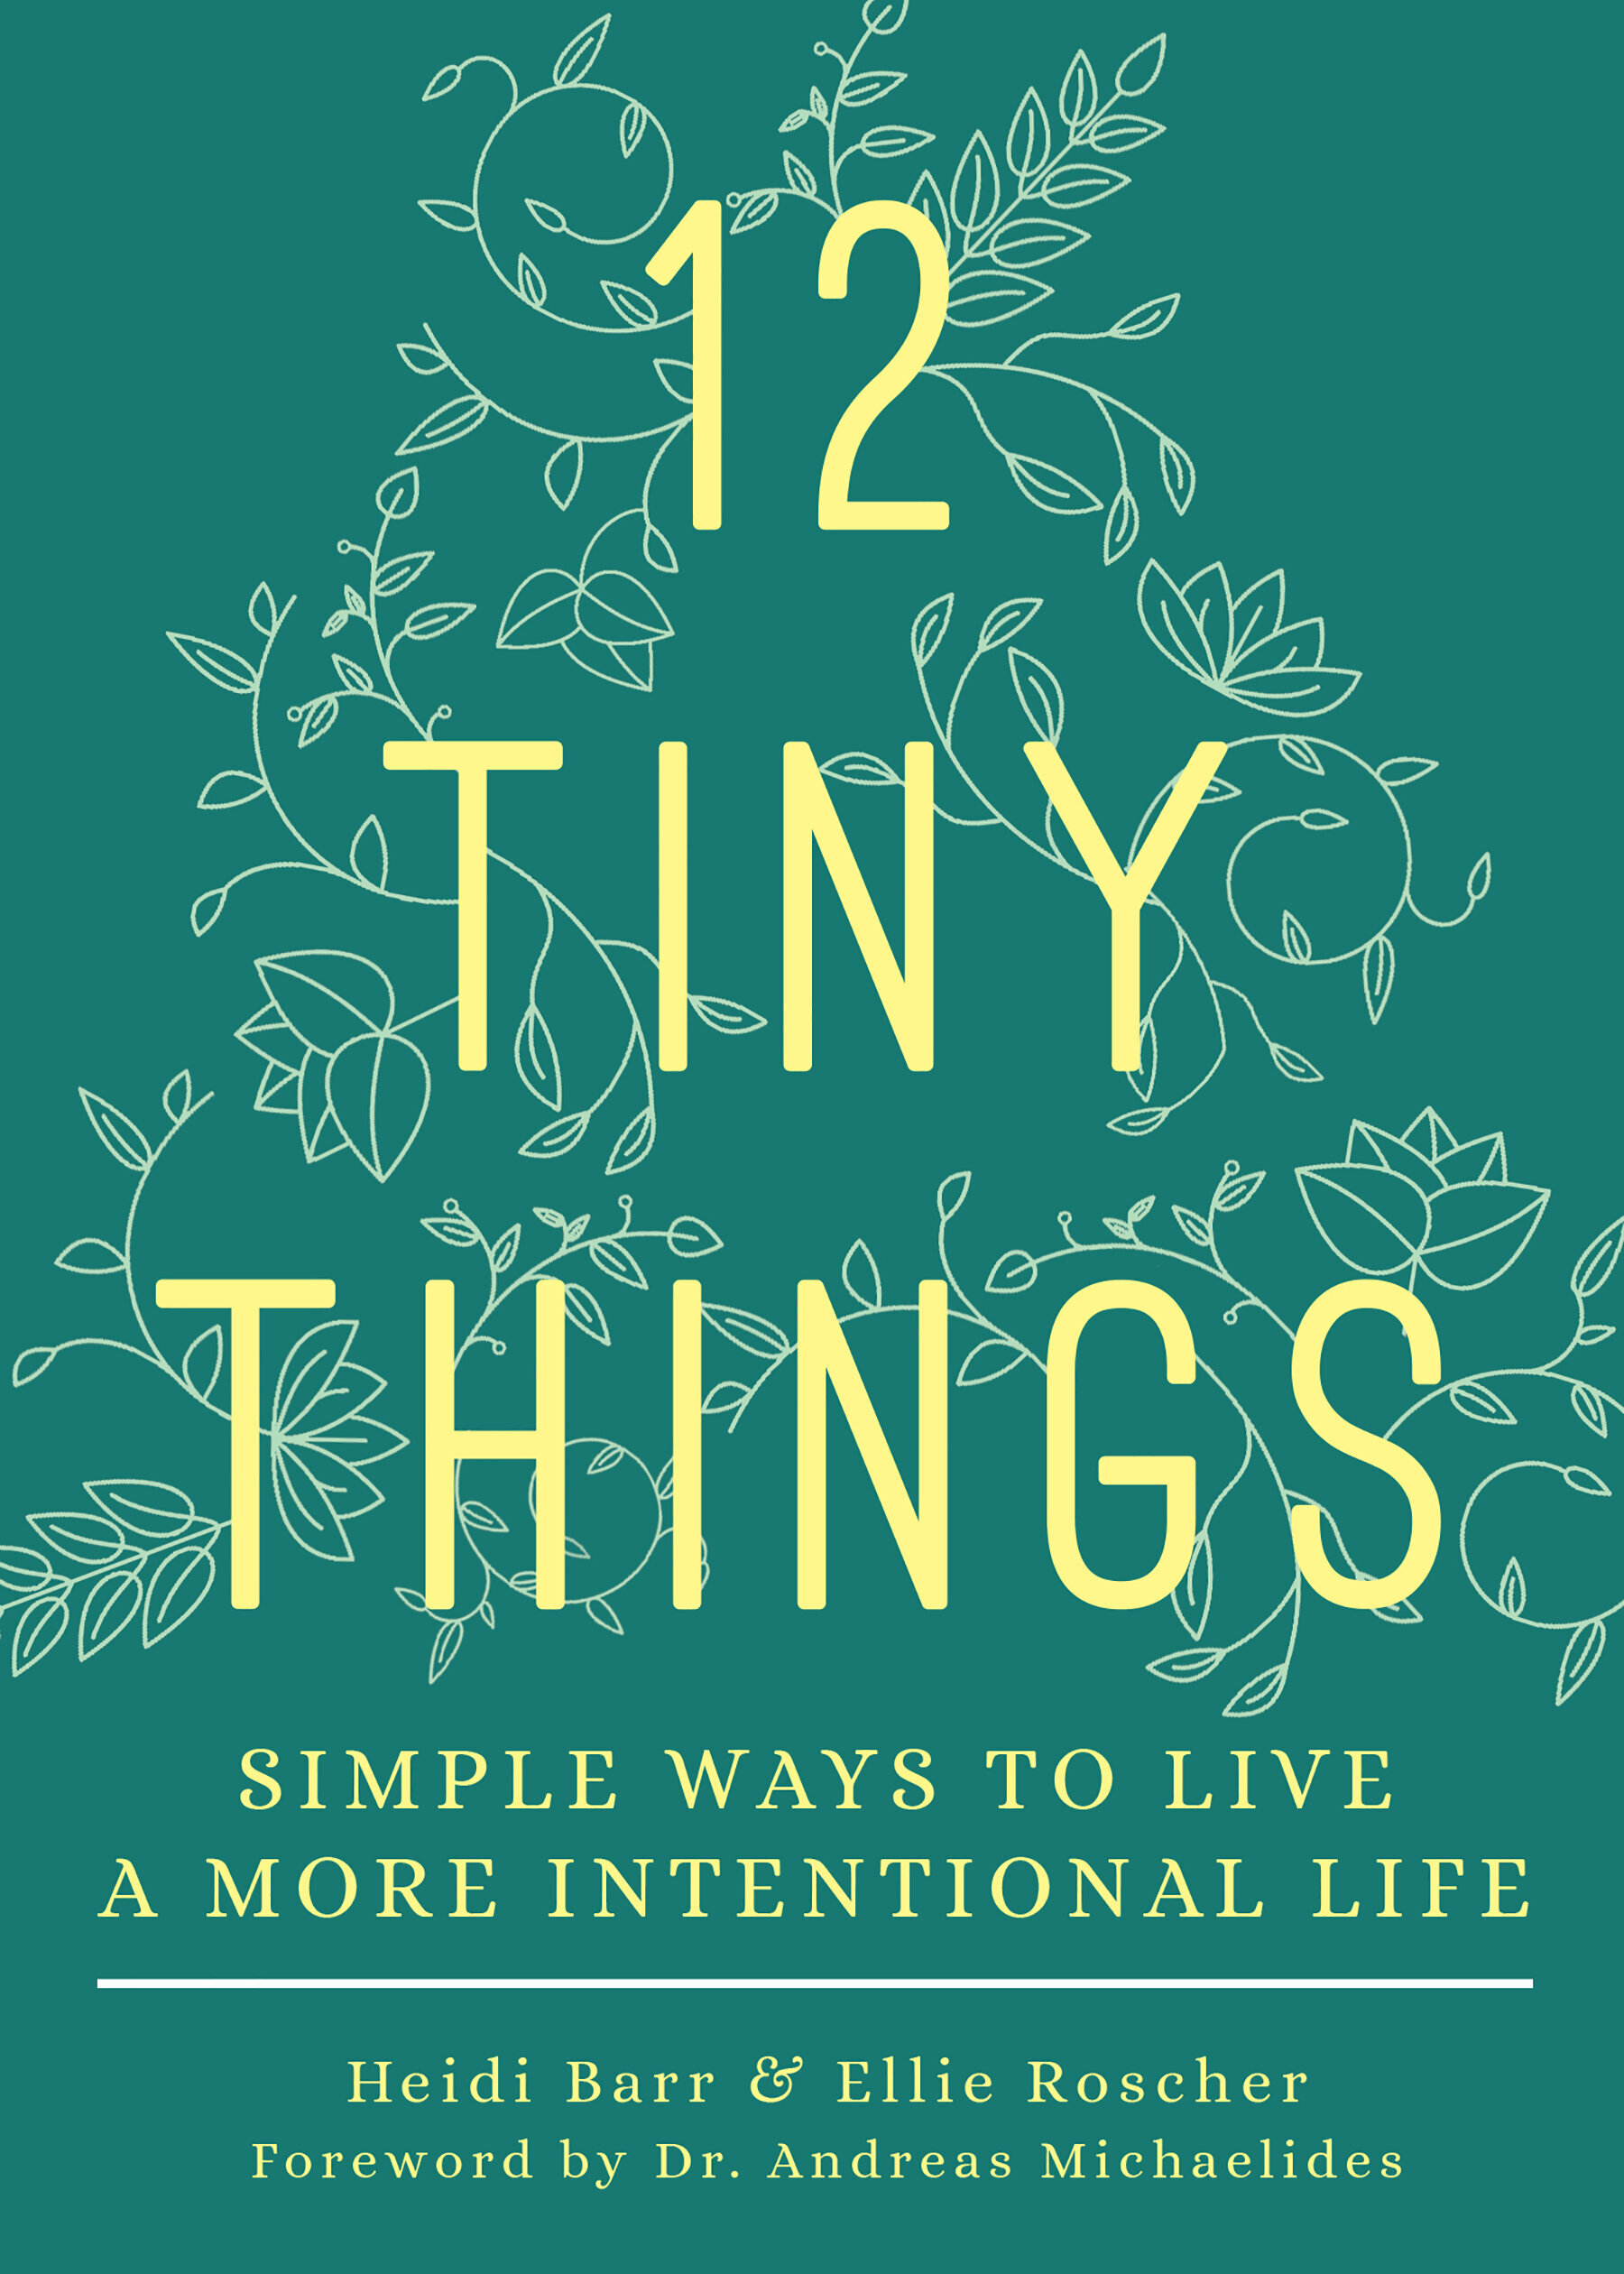 Book Cover of 12 Tiny Things by Heidi Barr